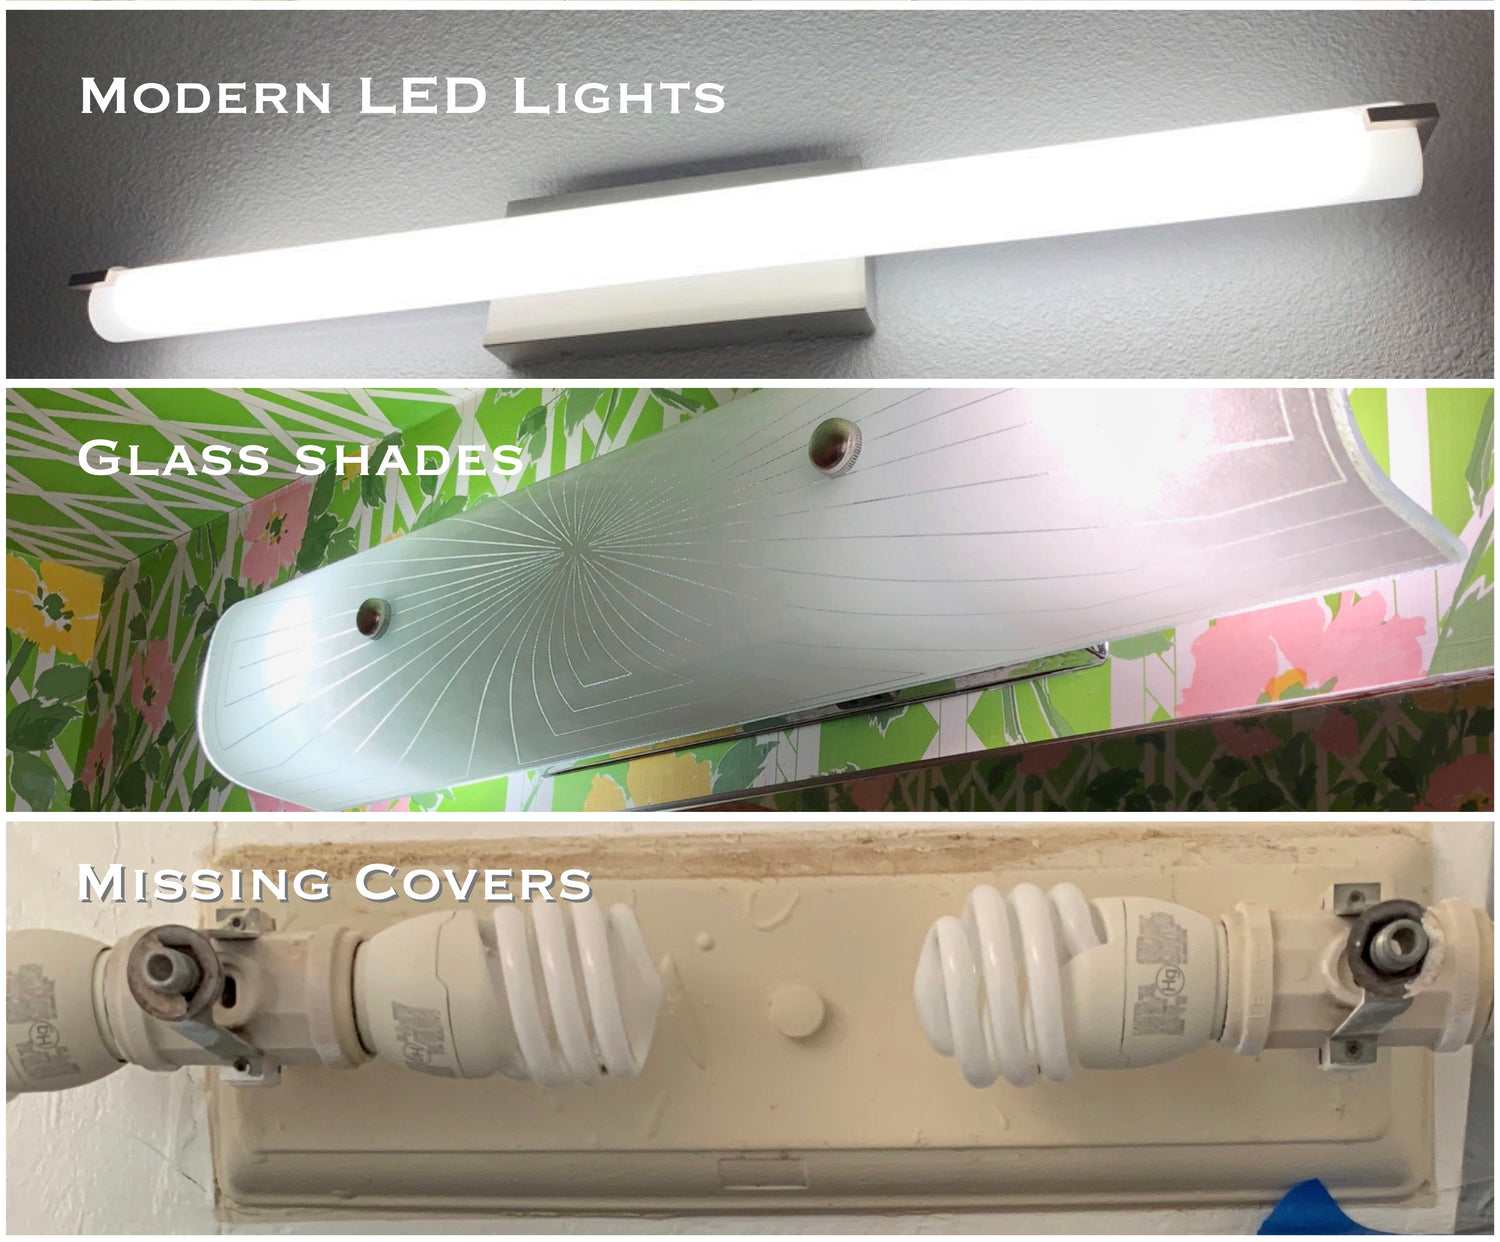 This pic shows 3 types of strip lights that our EzLightWraps cover -Brand new modern LED tube lights that are too bright for some folks, to replace dated glass shades from the 50's and showing one of those glass covered fixture without it - just showing the bulbs alone. This is one ugly fixture (very old and dirty) that we covered in minutes.